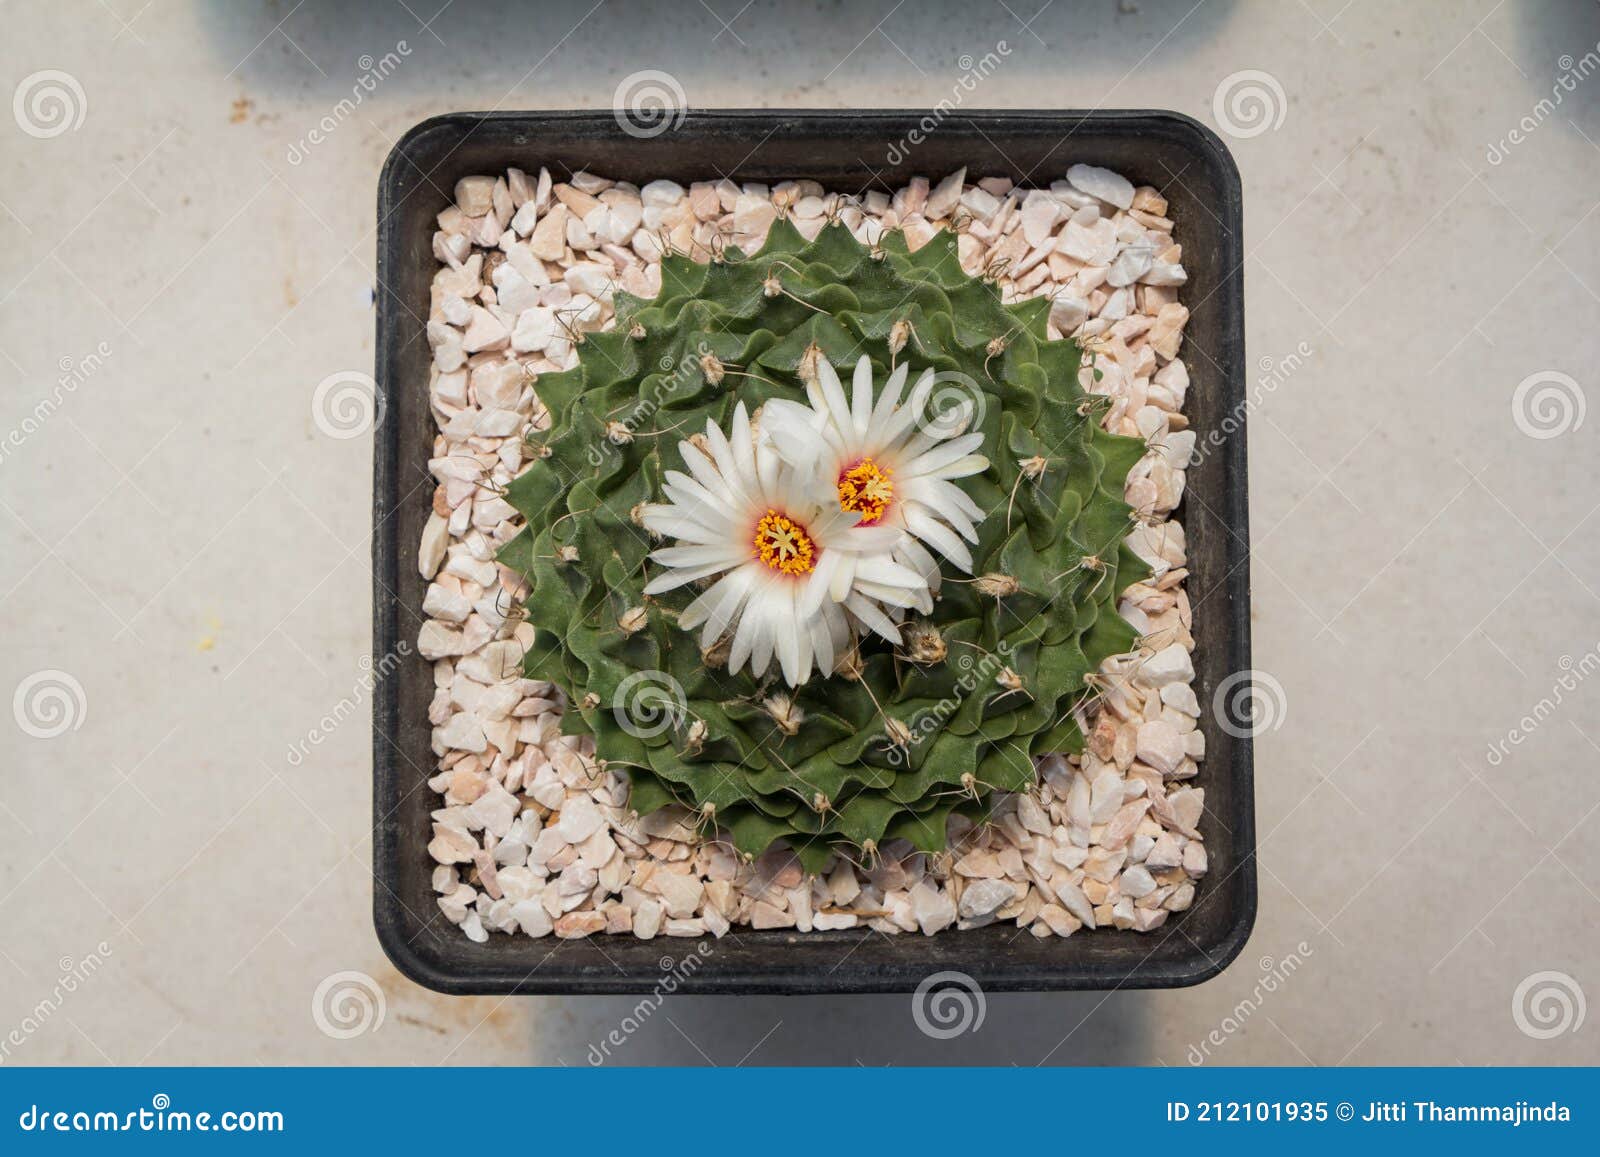 high-angle cactus obregonia denegrii because it is planted in a beautiful white flowerpot in a greenhouse